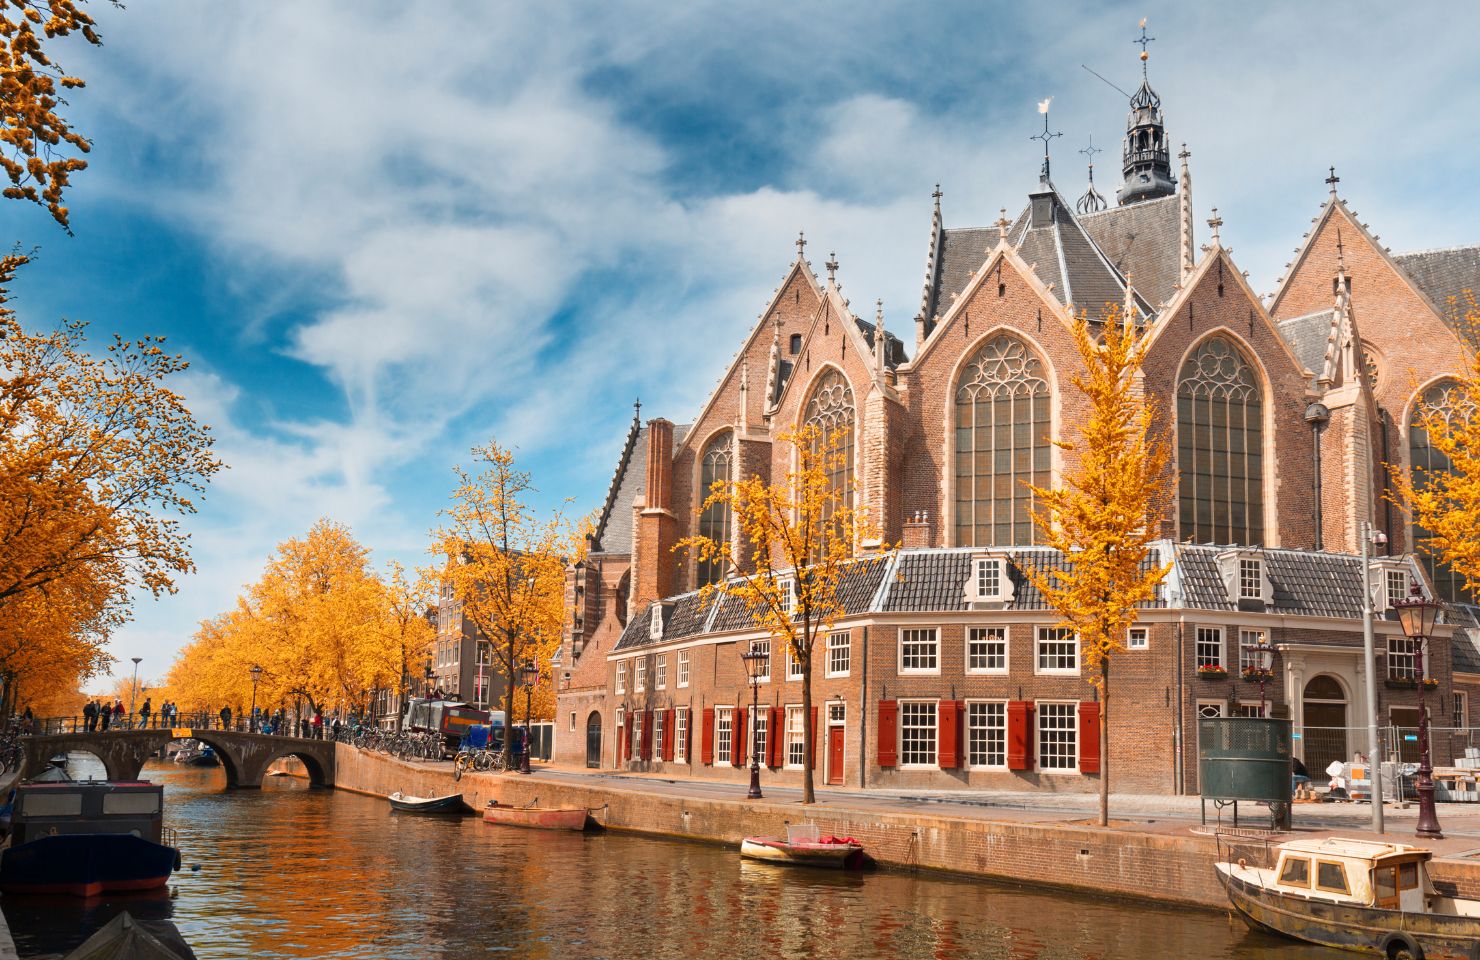 View over the canal towards a church in Amsterdam